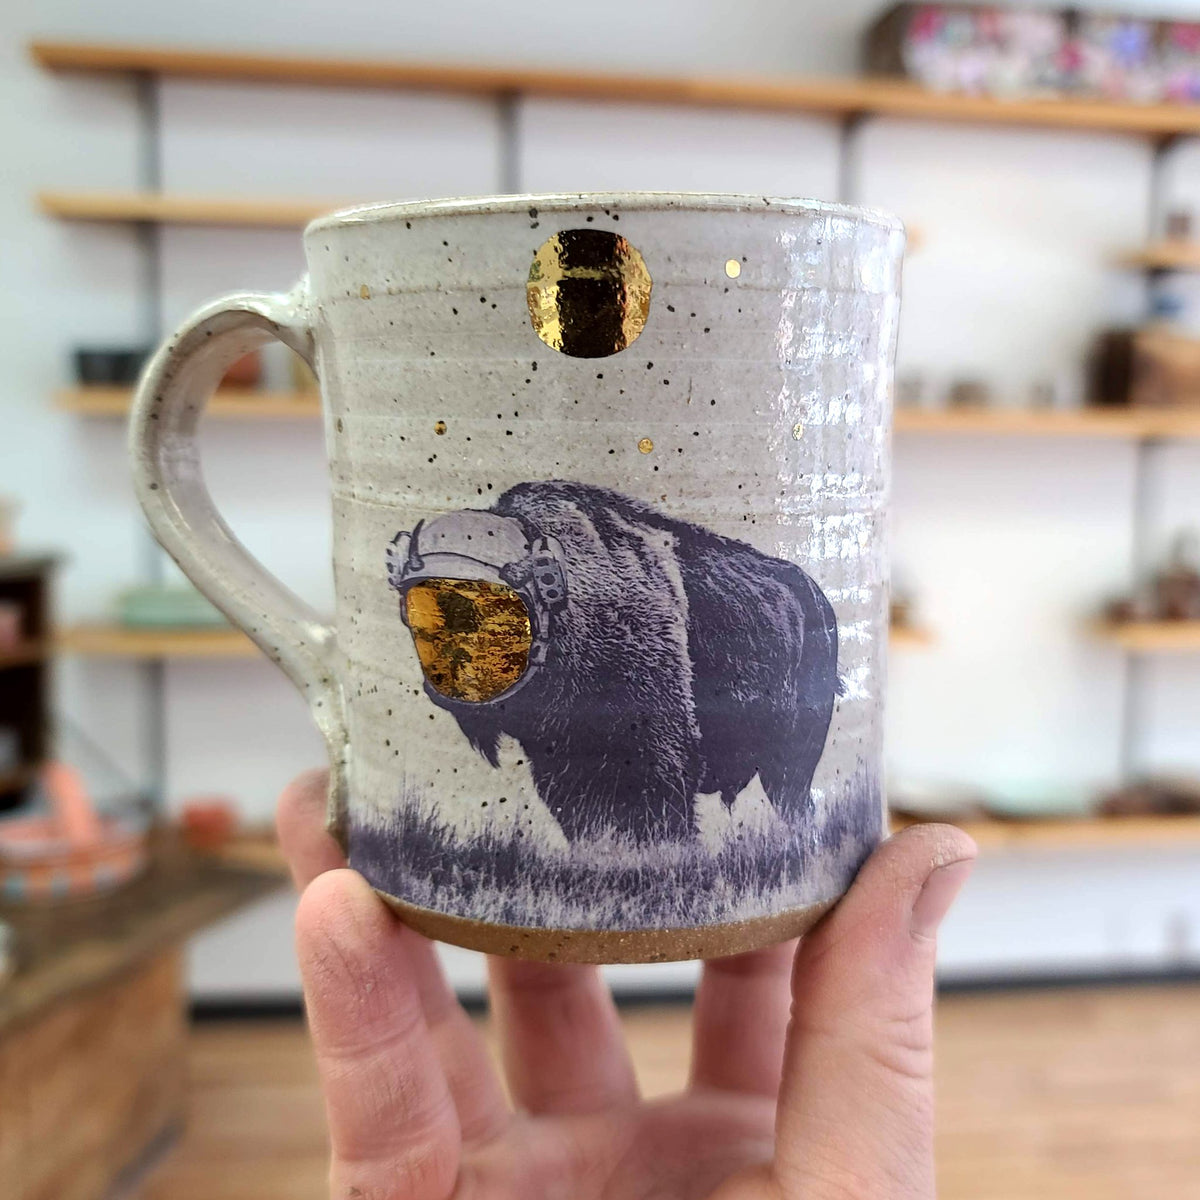 15oz Ceramic Mug with a bison in a space helmet with a gold shield